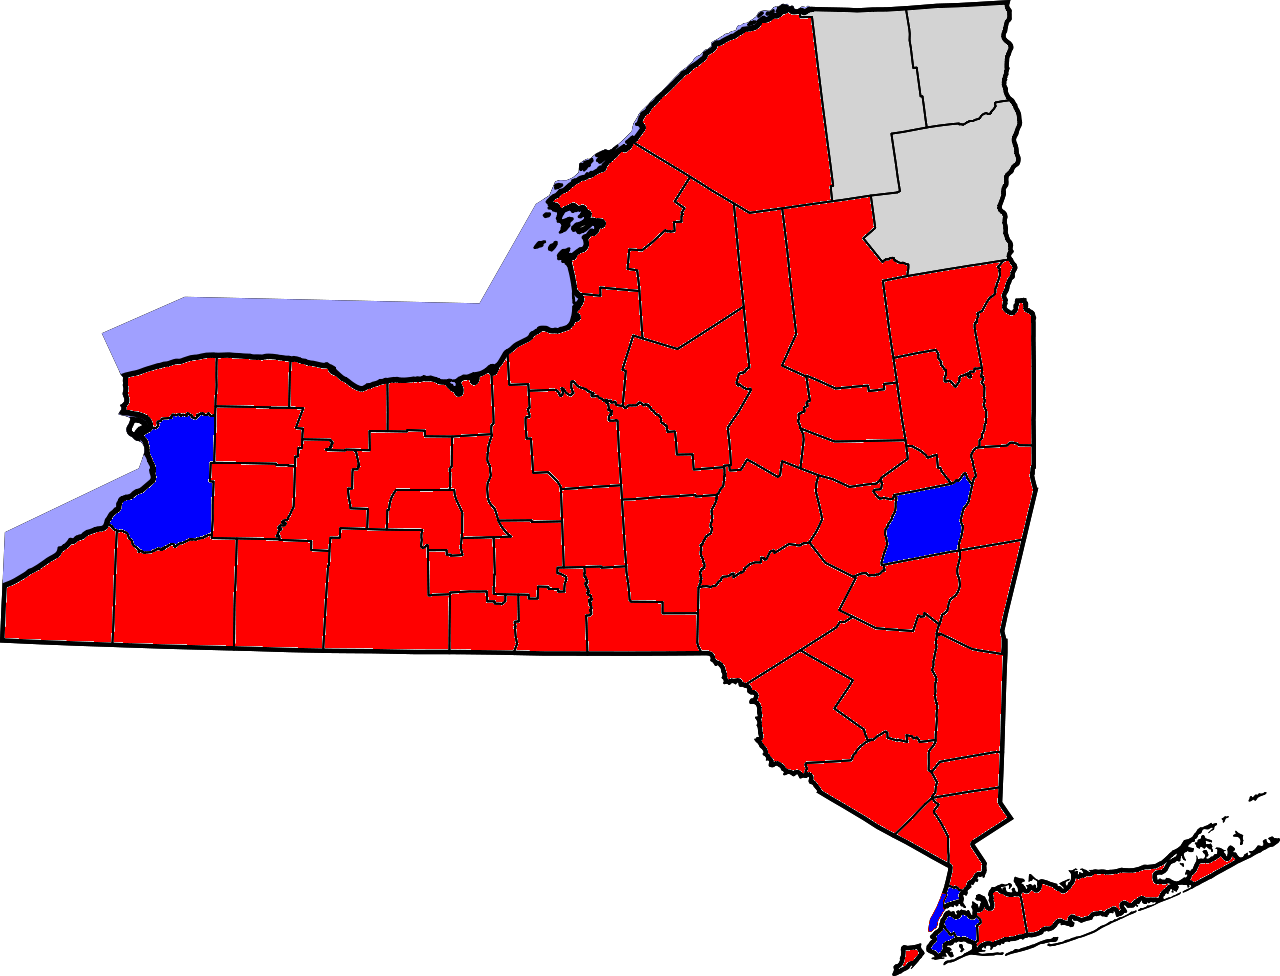 United States Senate Election In New York, 2000 - State Of Long Island (1280x976)